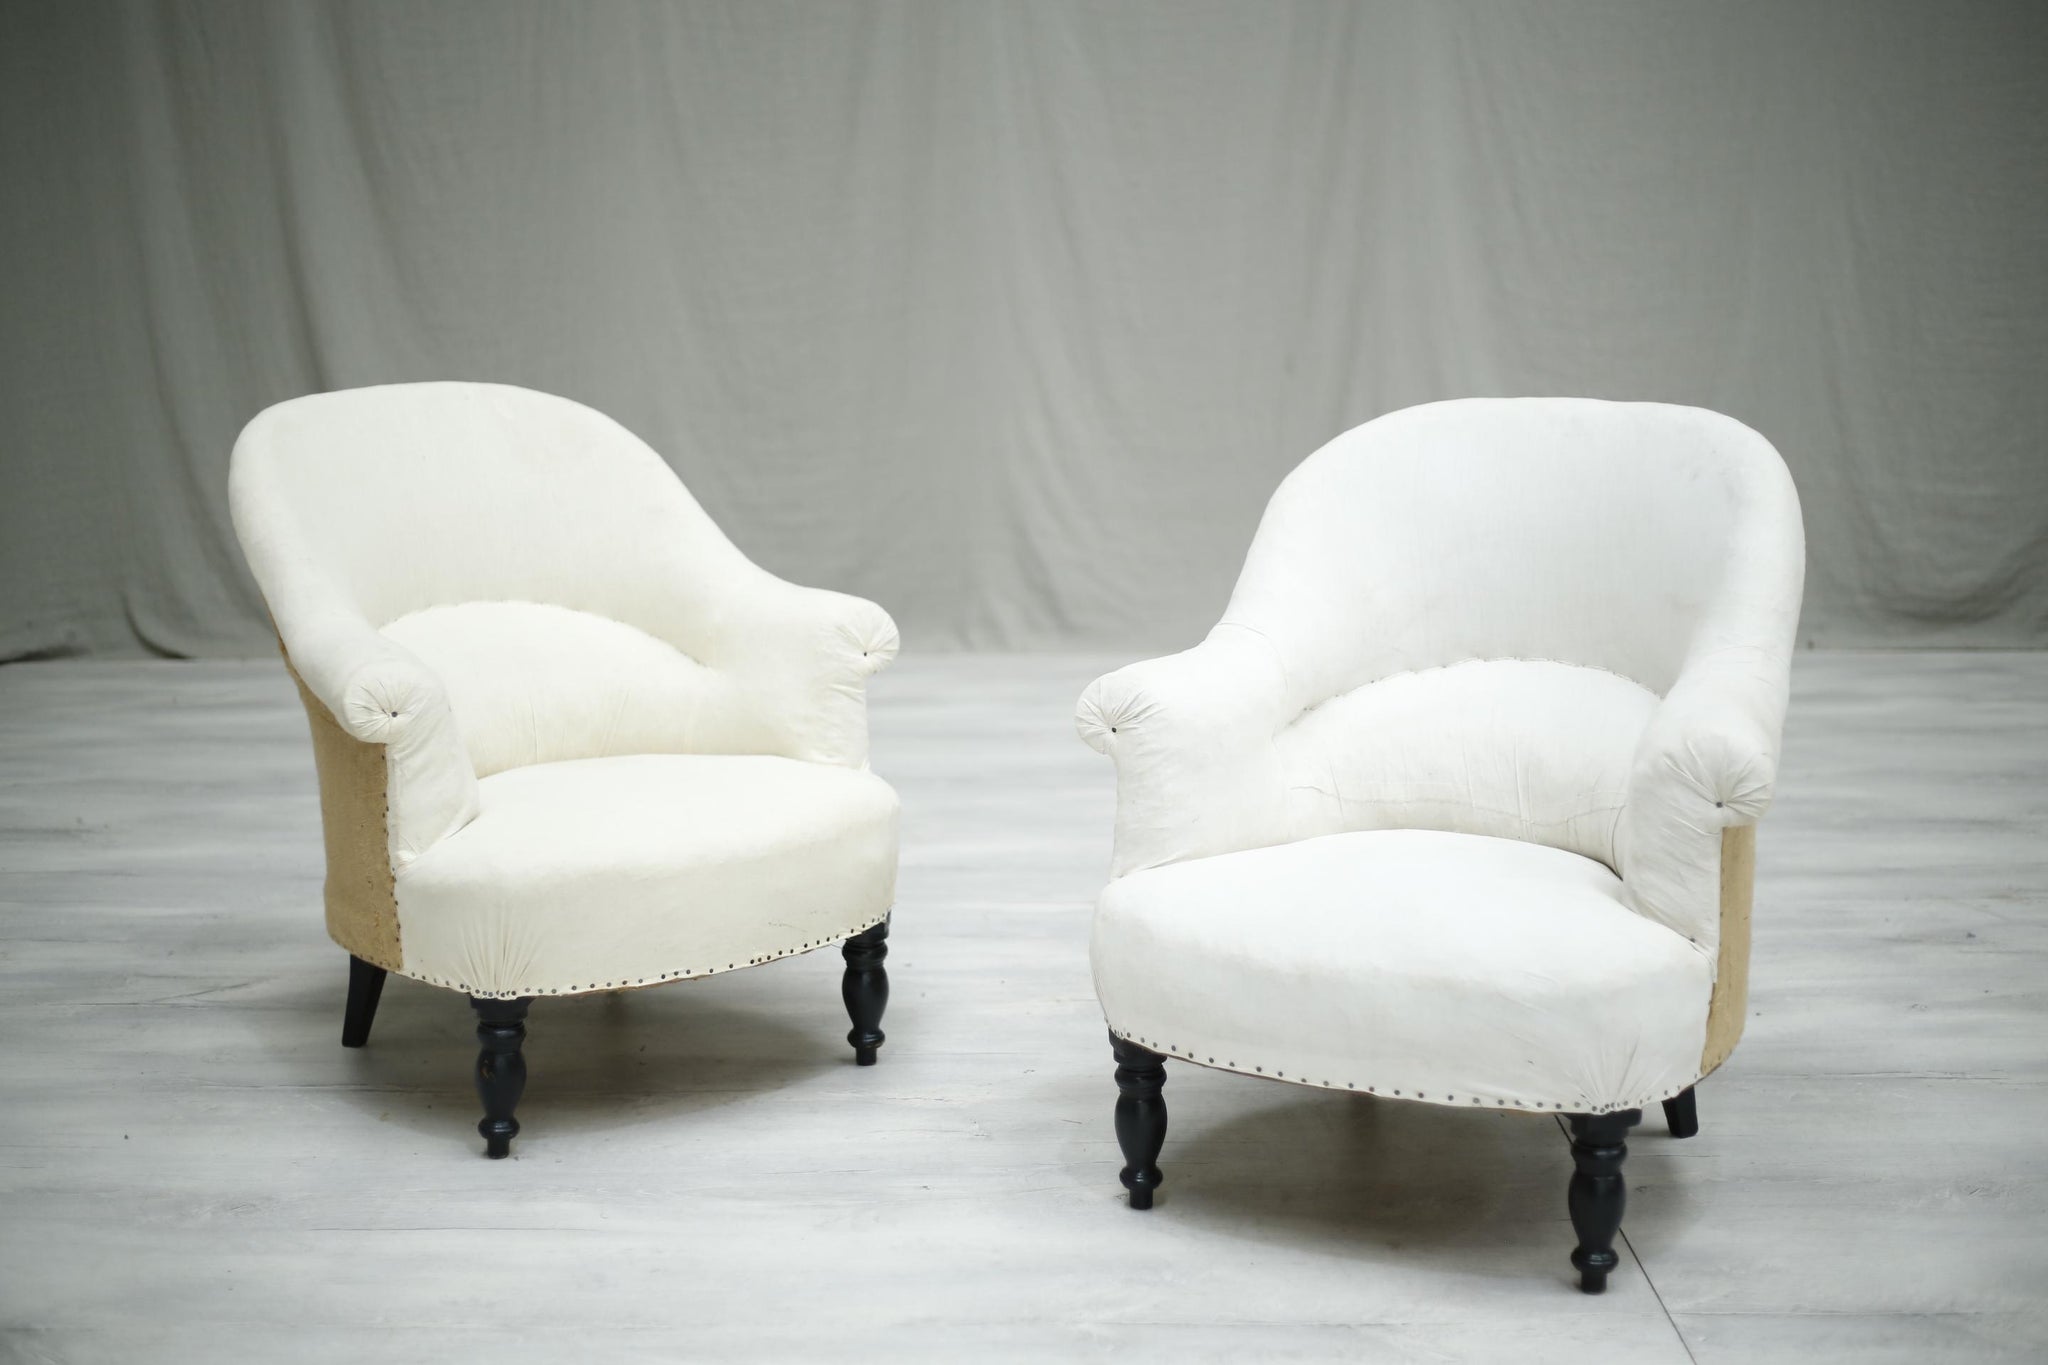 Pair of Antique French tub chairs - TallBoy Interiors